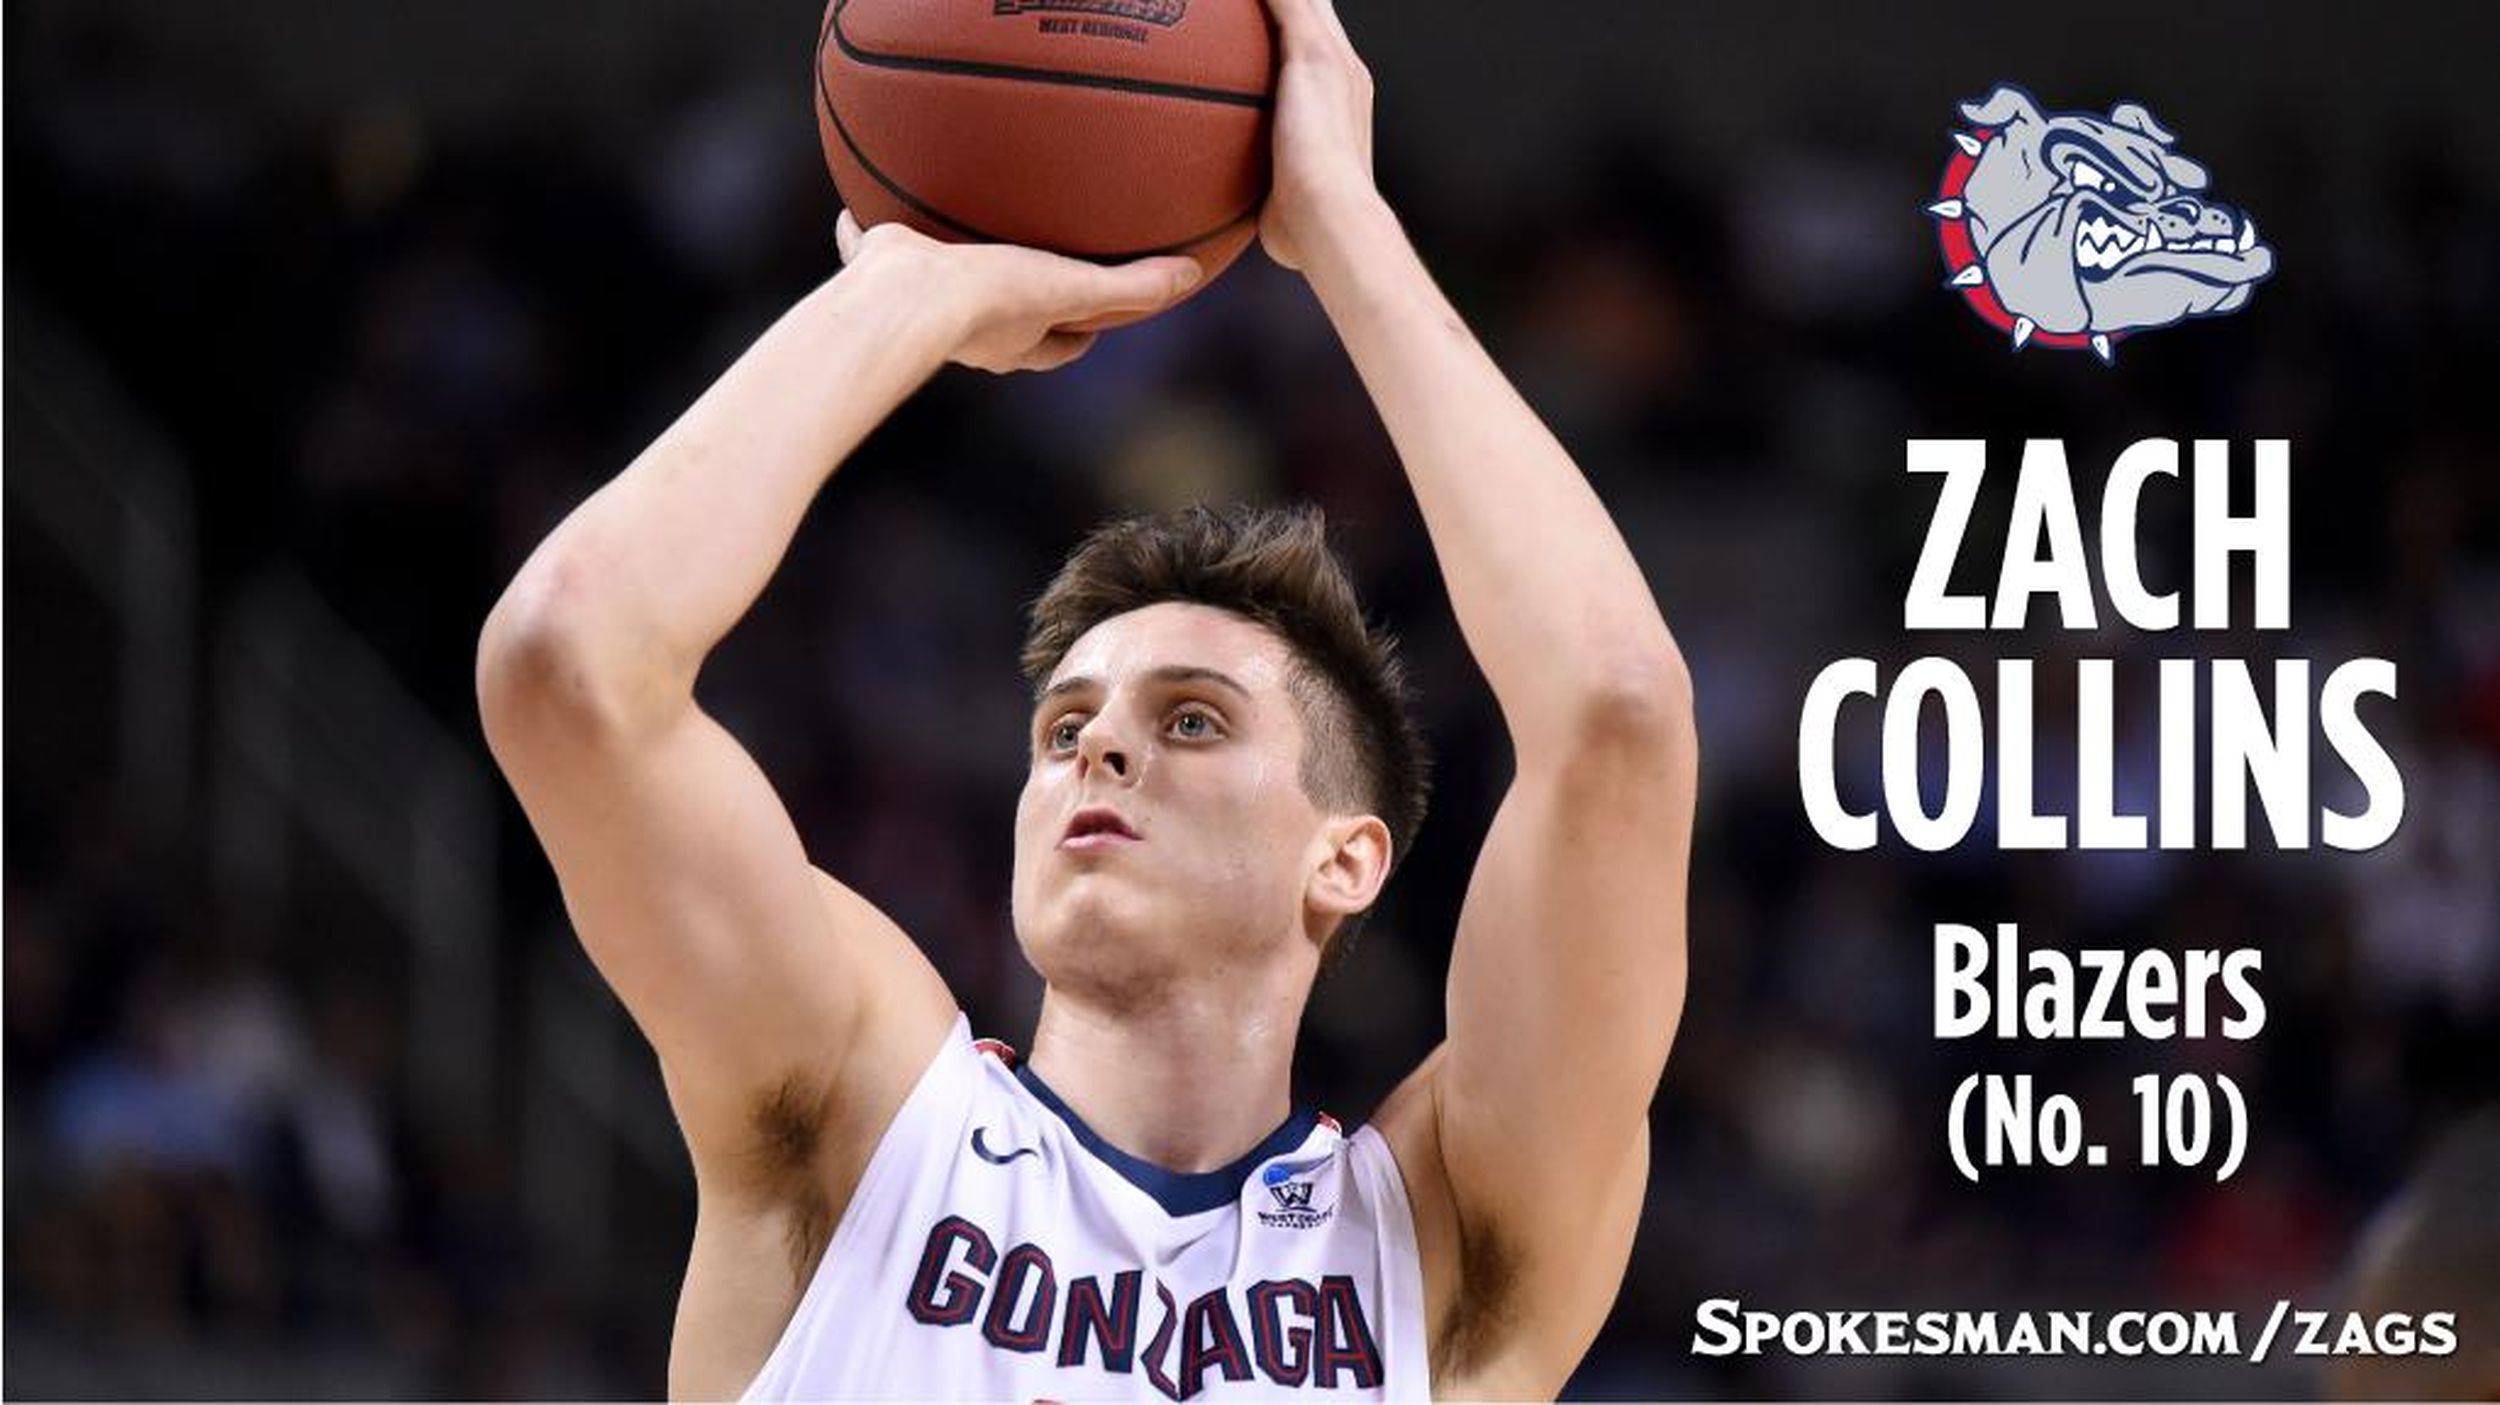 Zach Collins shines on the brightest of stages, leads Gonzaga to